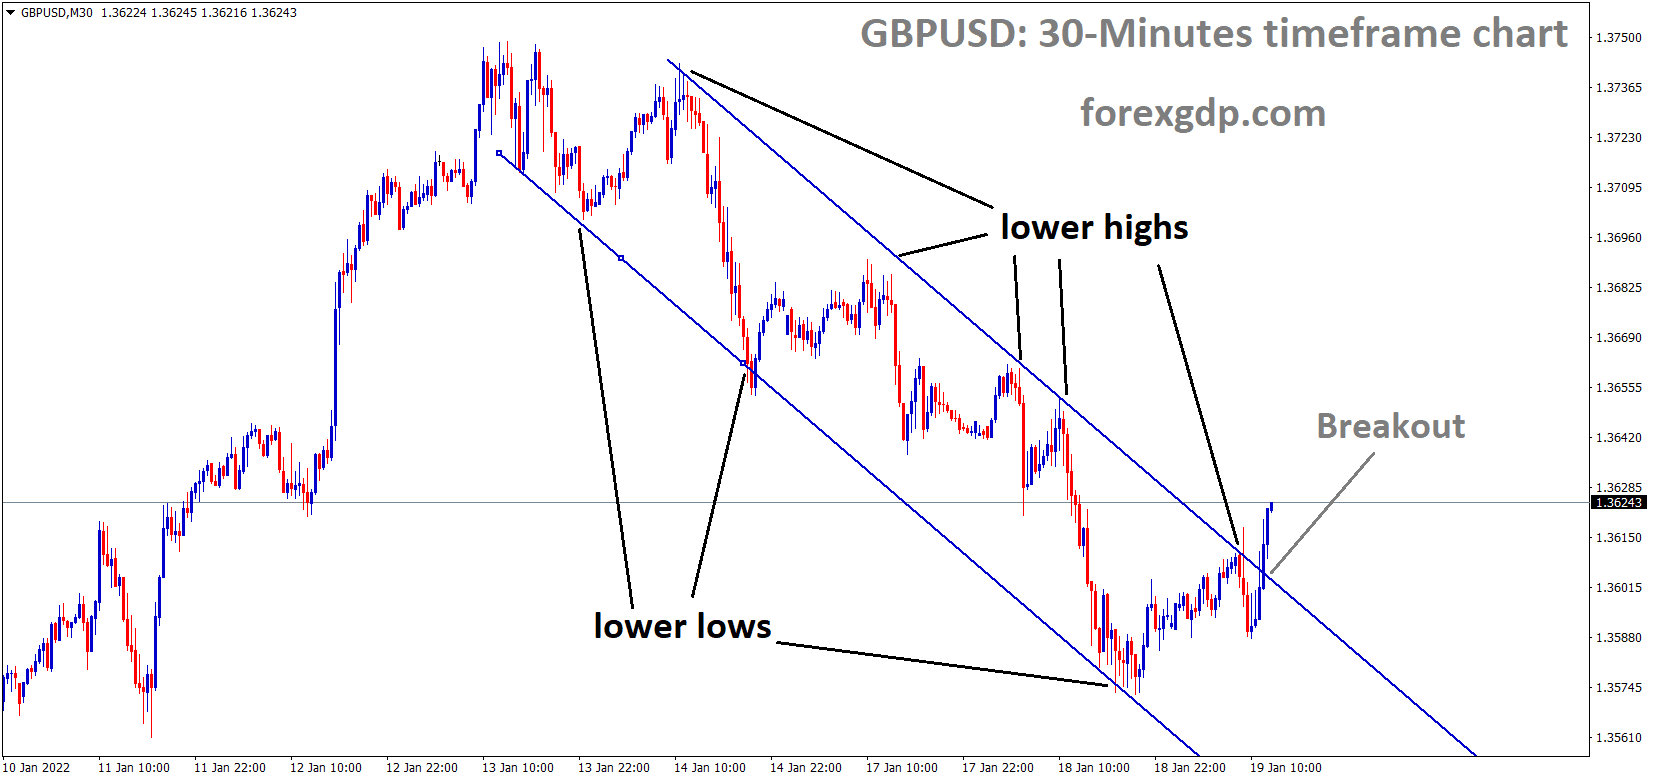 GBPUSD is moving in the Descending channel and the market has broken the lower high area of the Descending channel